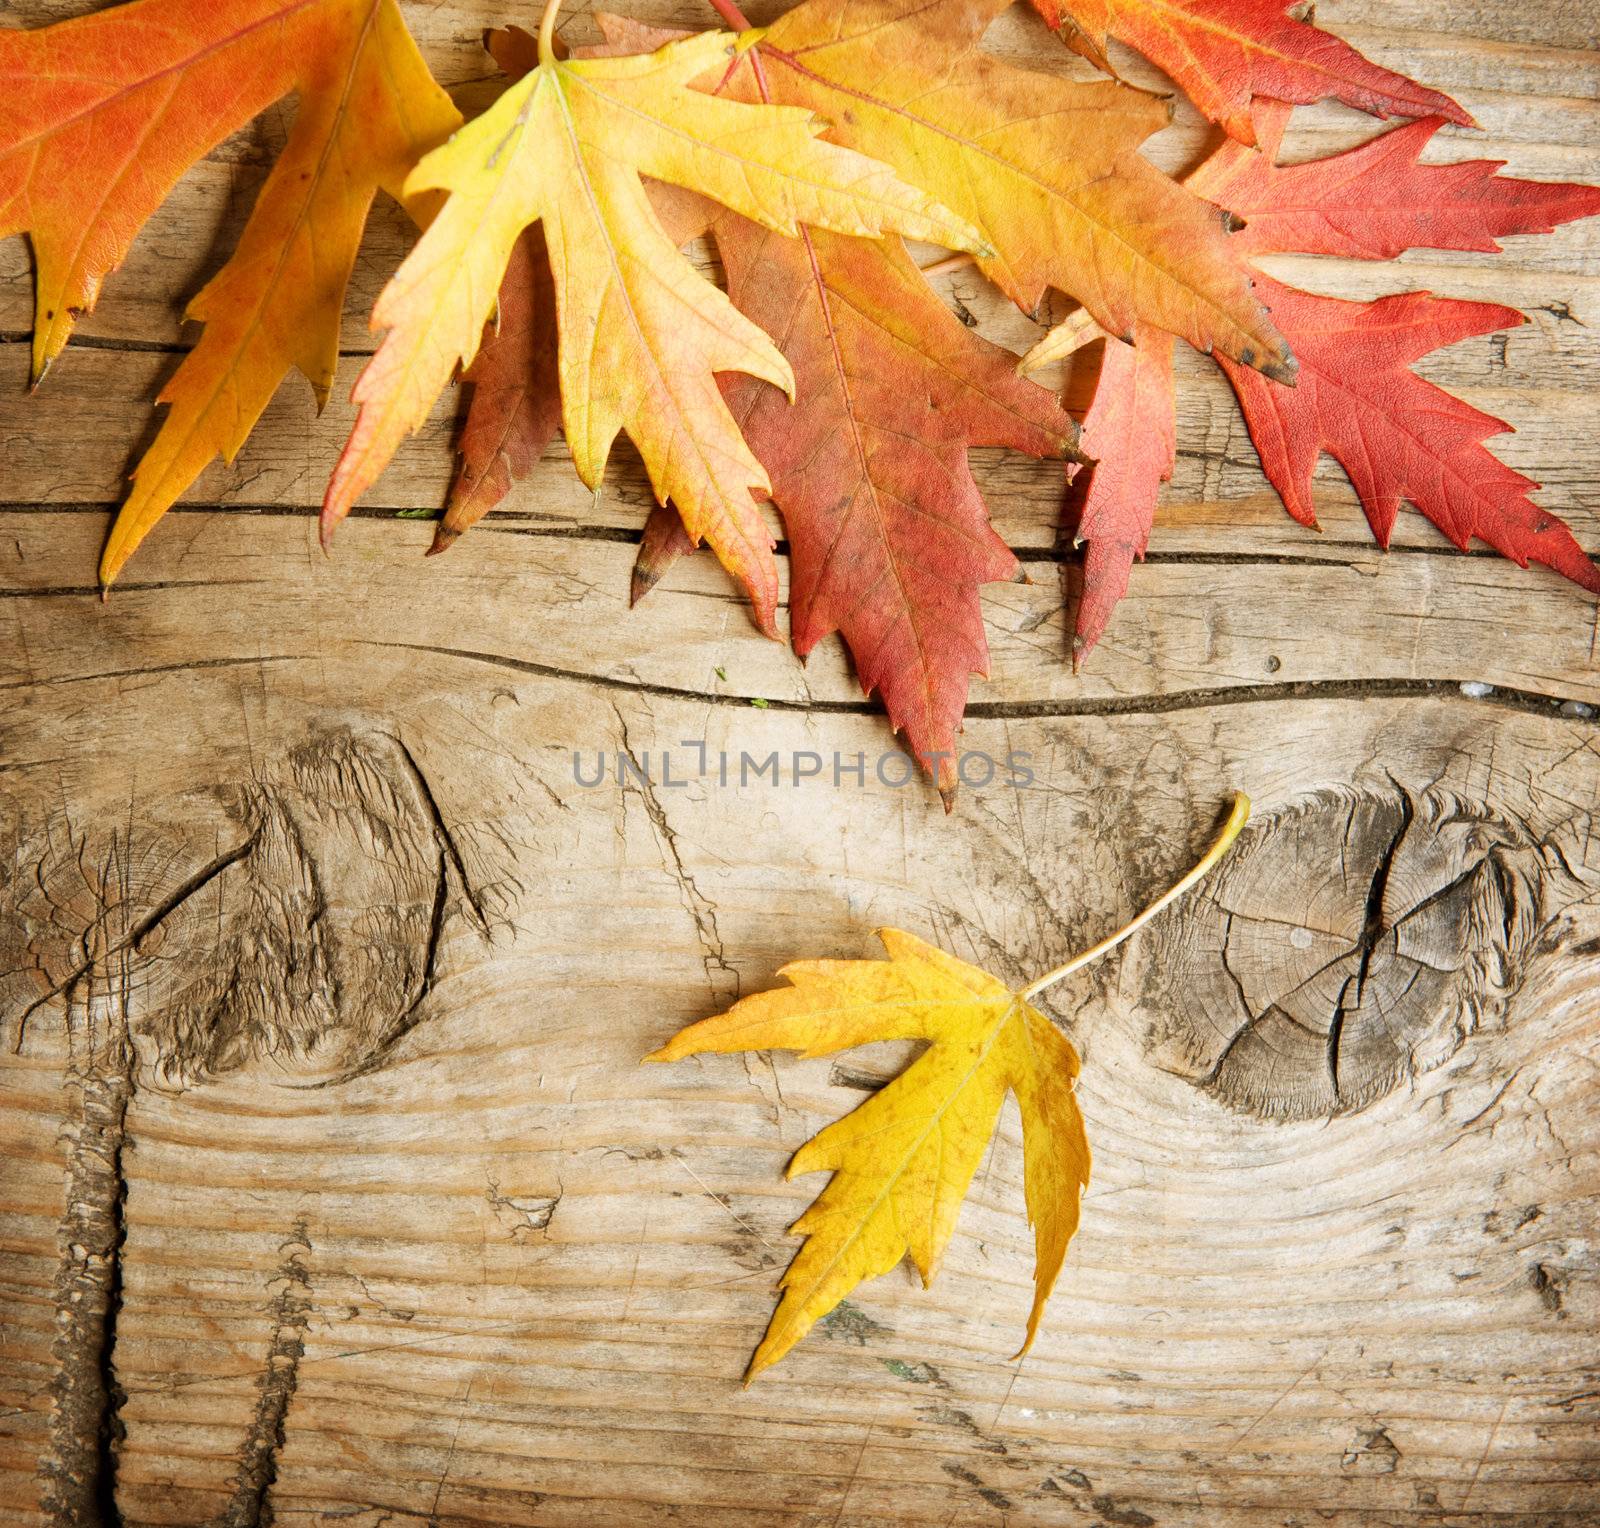 Autumn Leaves over wood background by SubbotinaA